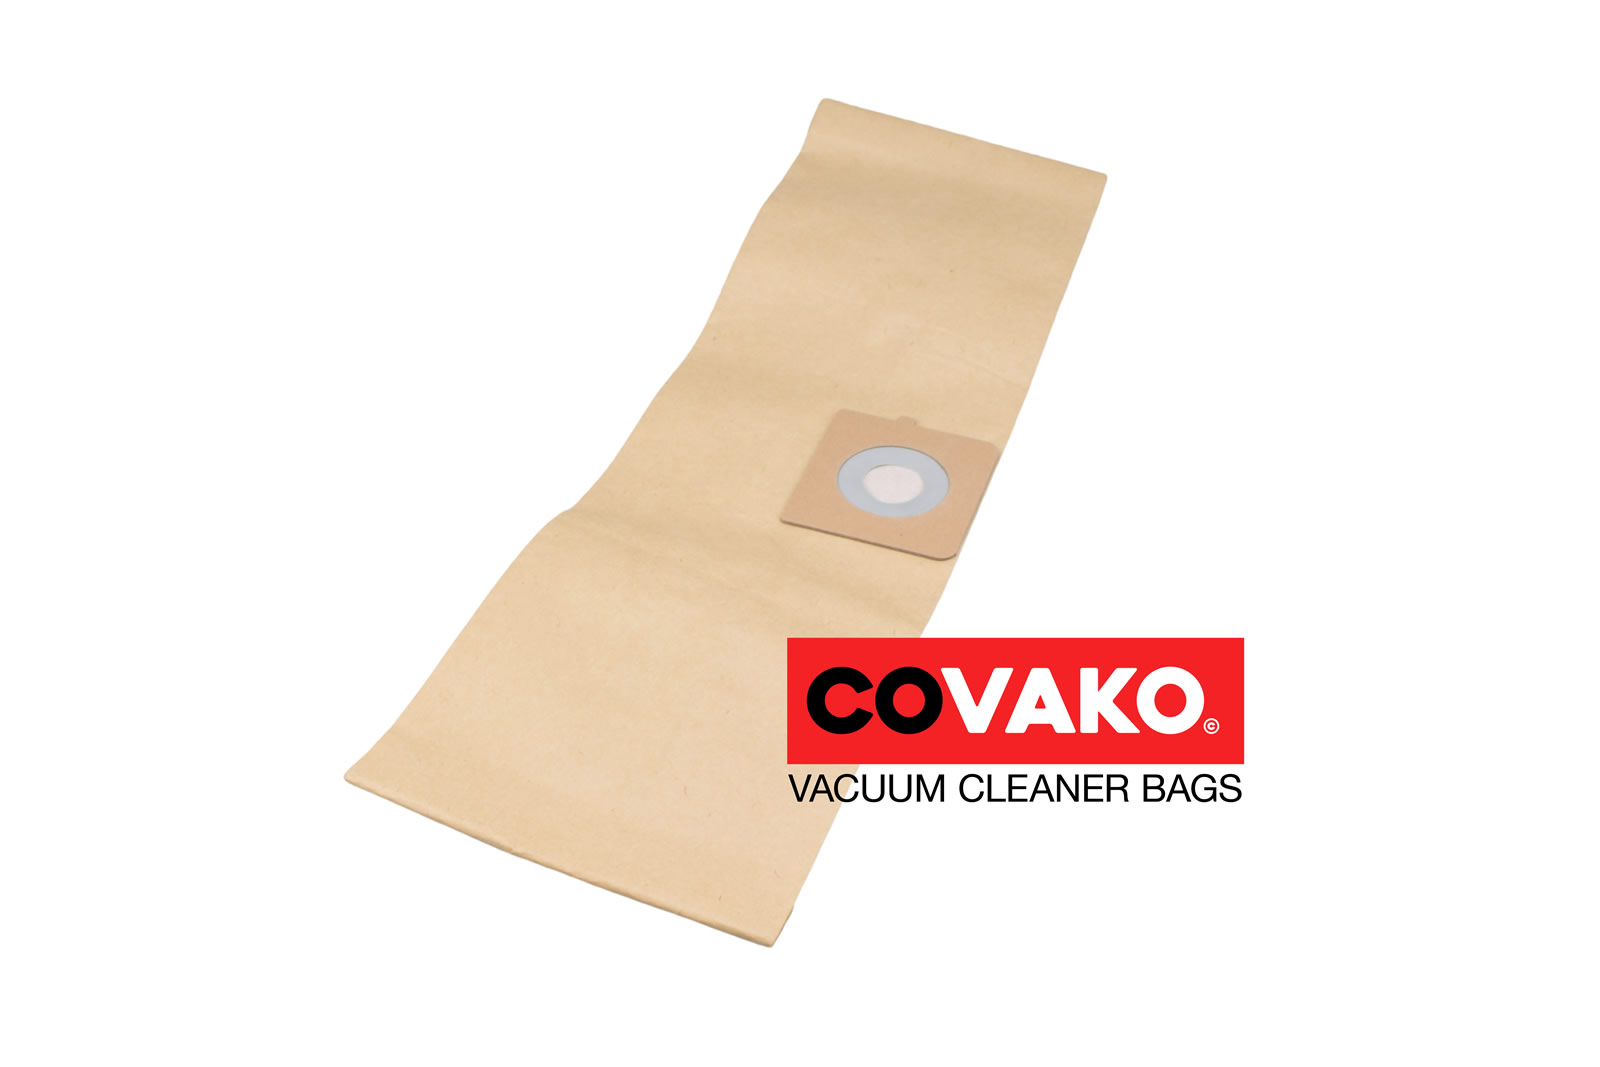 Oehme Otto 491015 / Paper - Oehme Otto vacuum cleaner bags